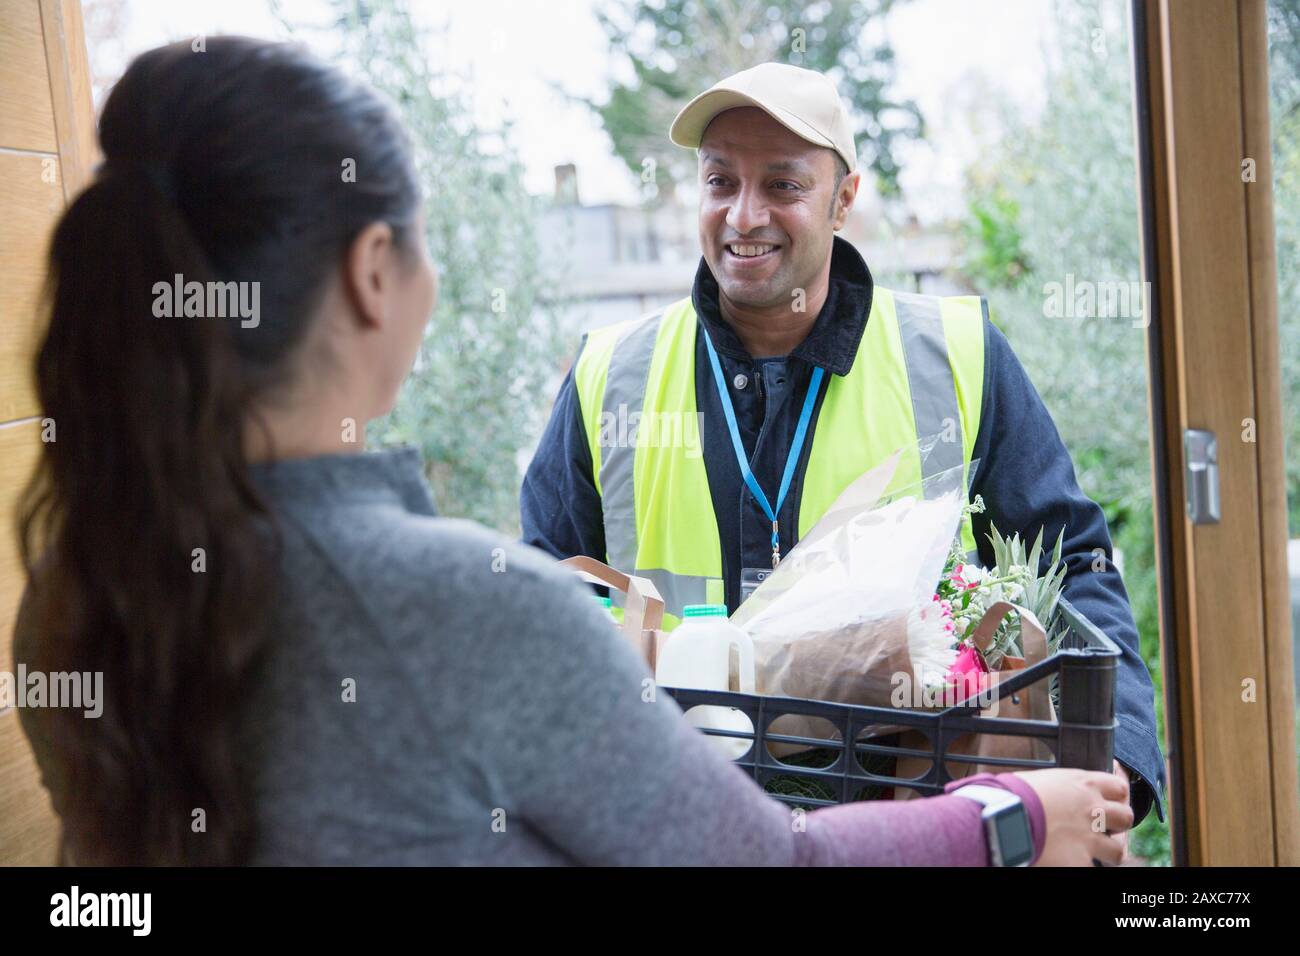 Woman greeting food deliveryman at front door Stock Photo